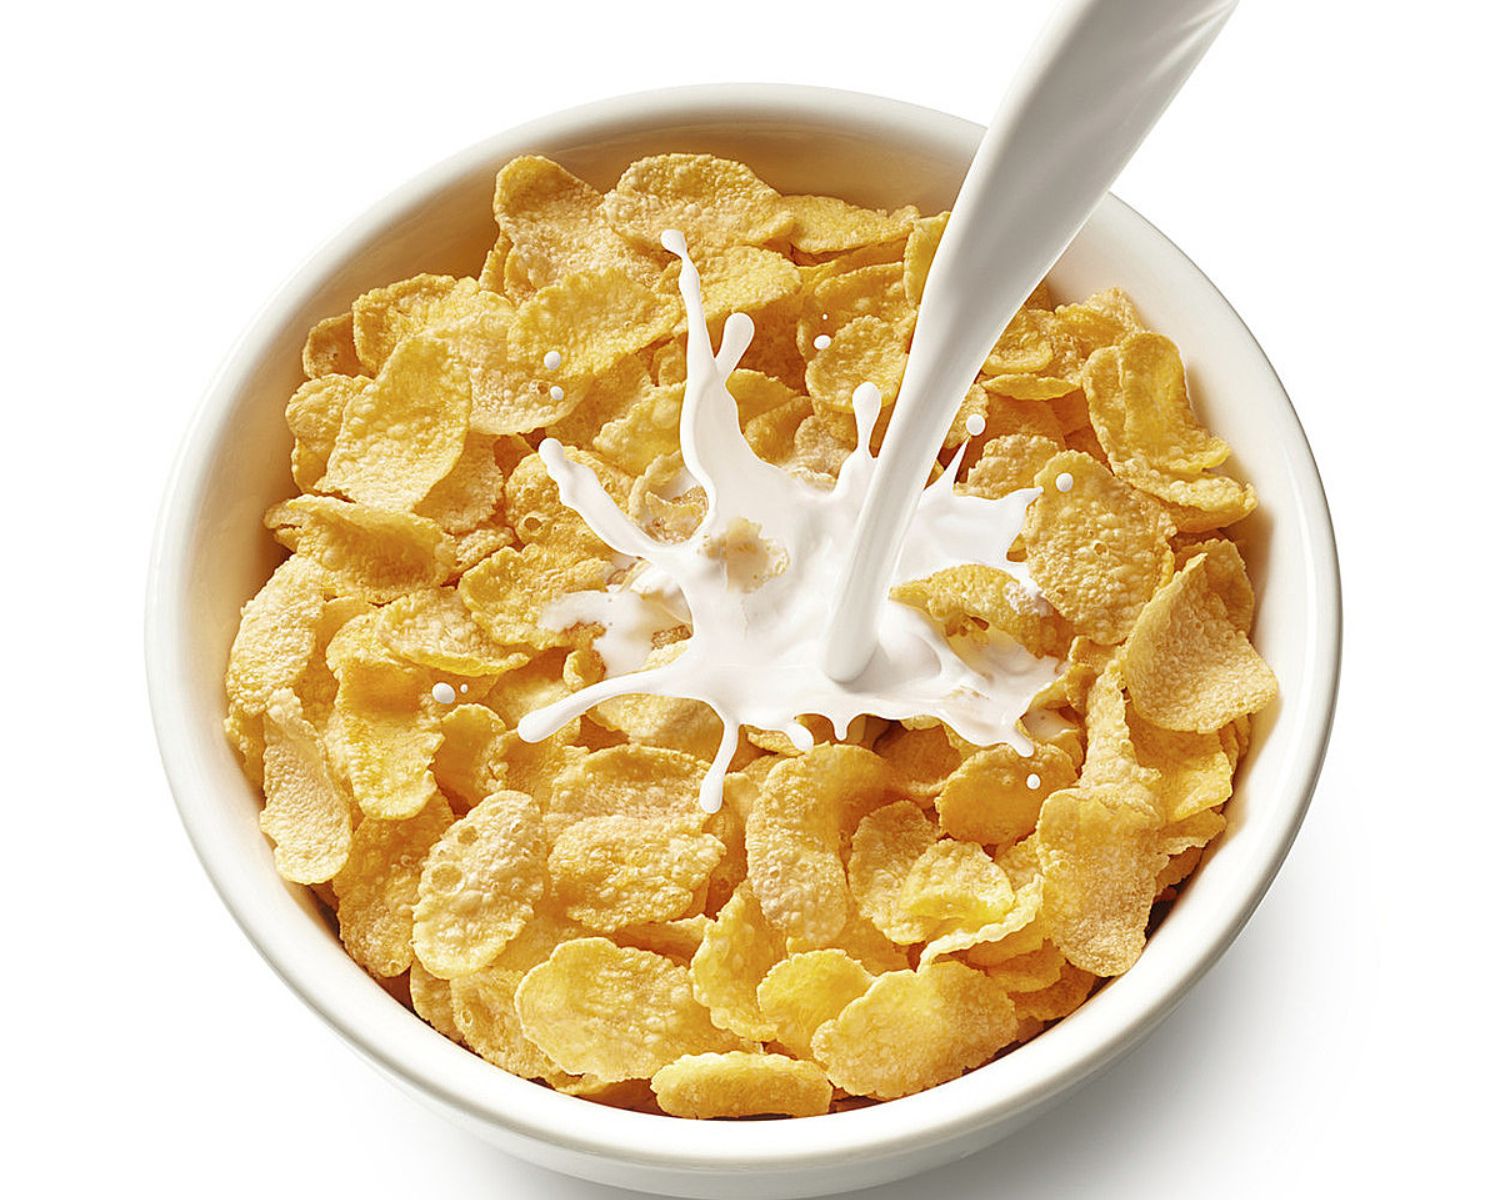 20-fun-facts-about-cereal